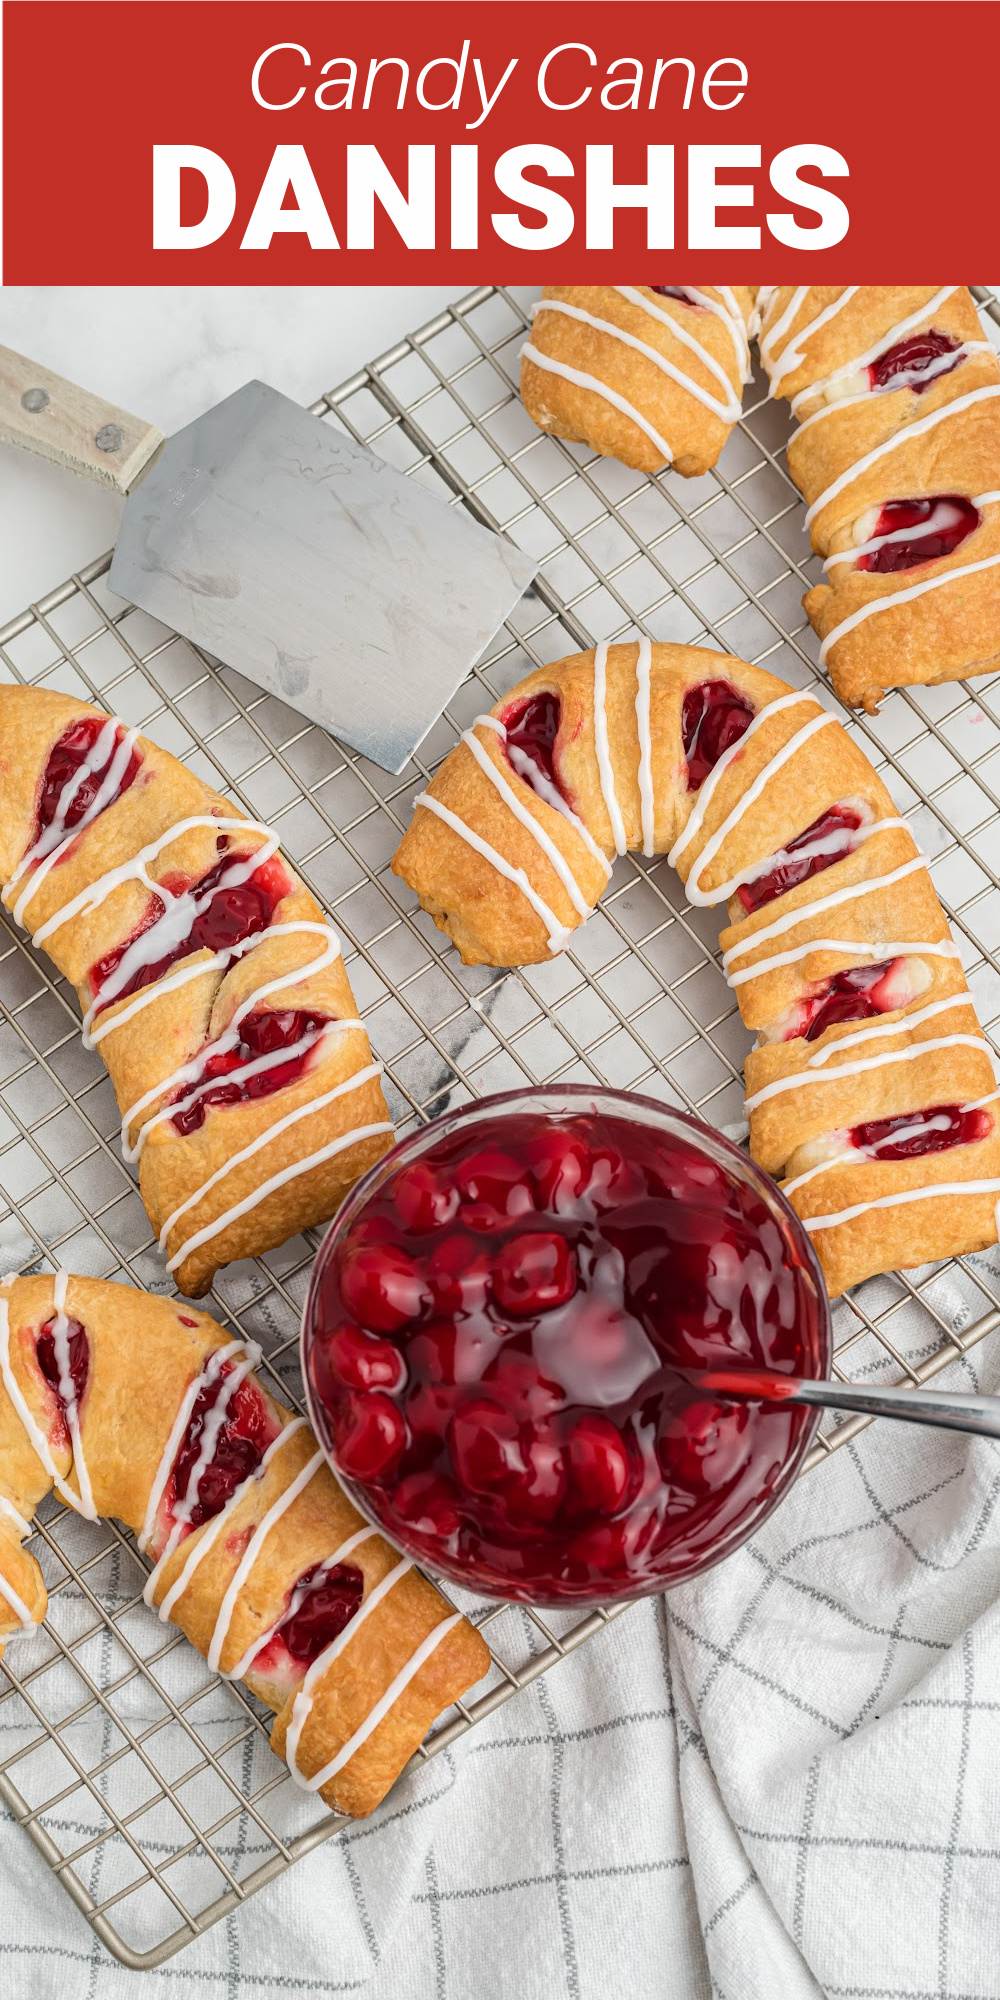 are used as the base filled with a sweet cream cheese filling and topped with cherry pie filling to make the perfect Christmas morning treat.